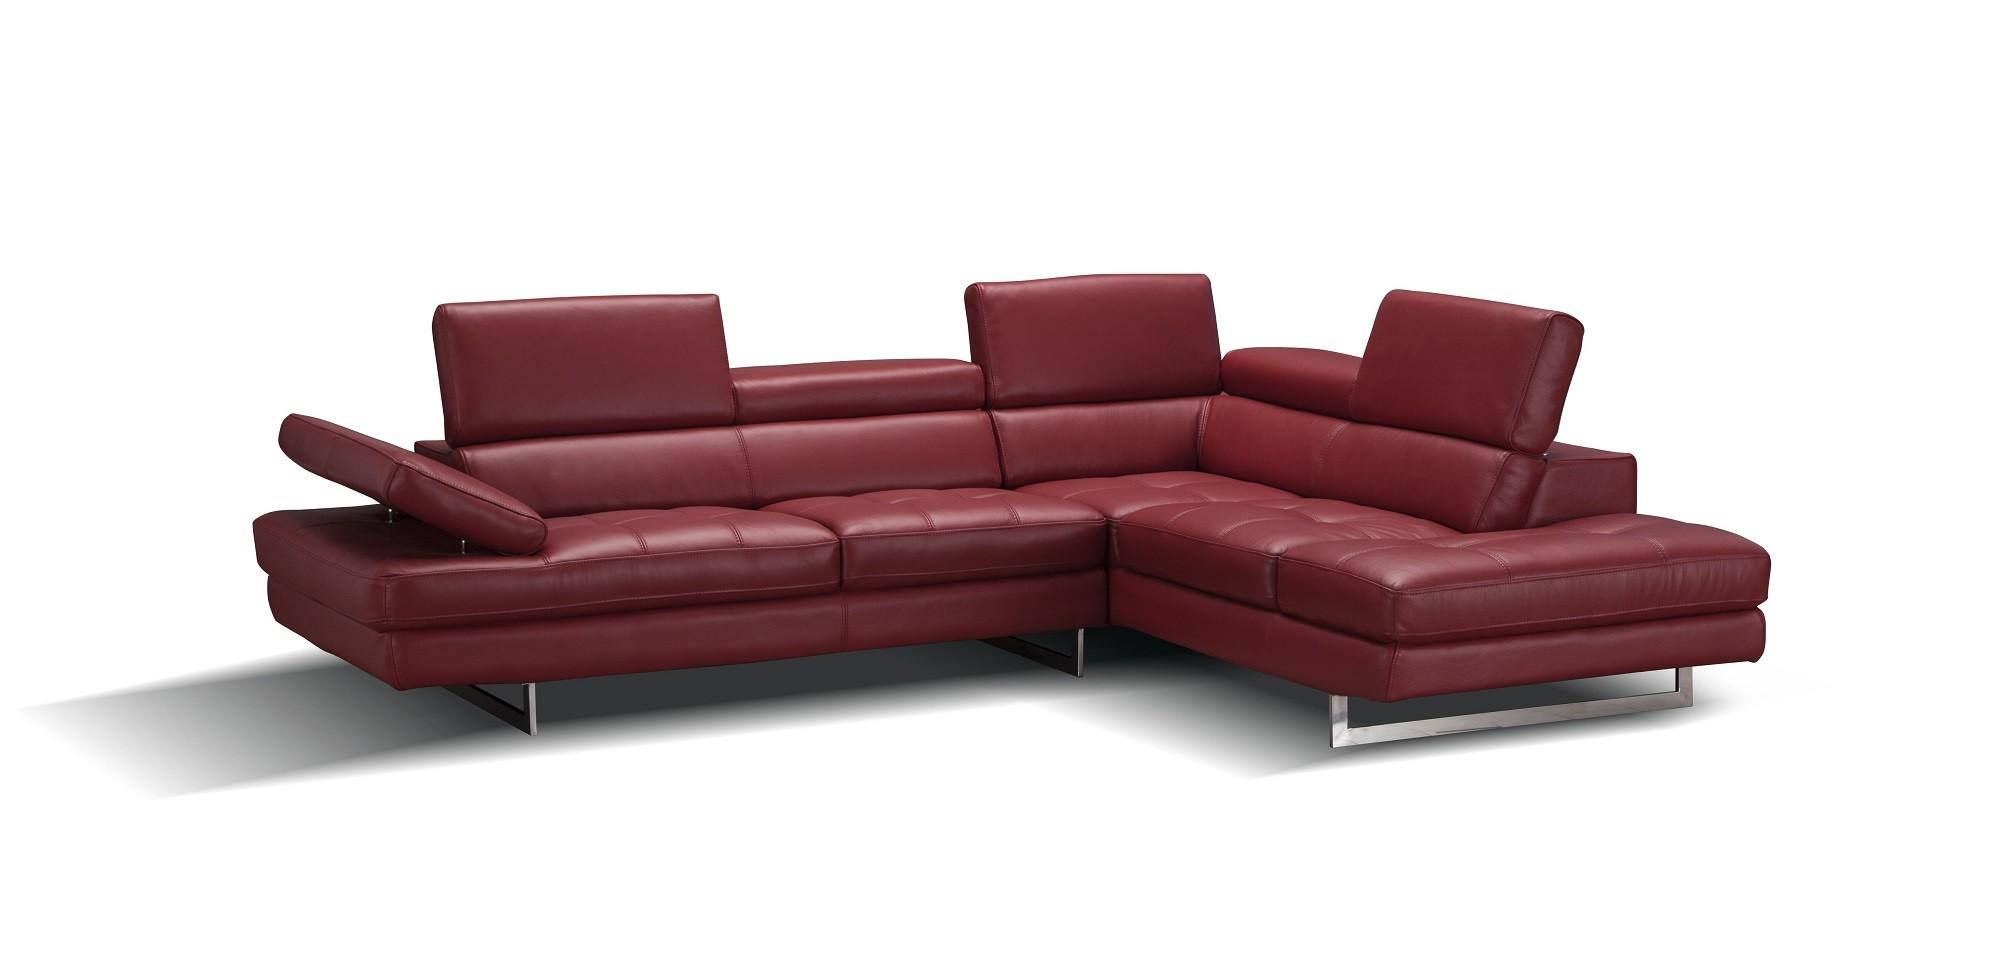 Contemporary Sectional Sofa A761 SKU 178554 in Red Italian Leather